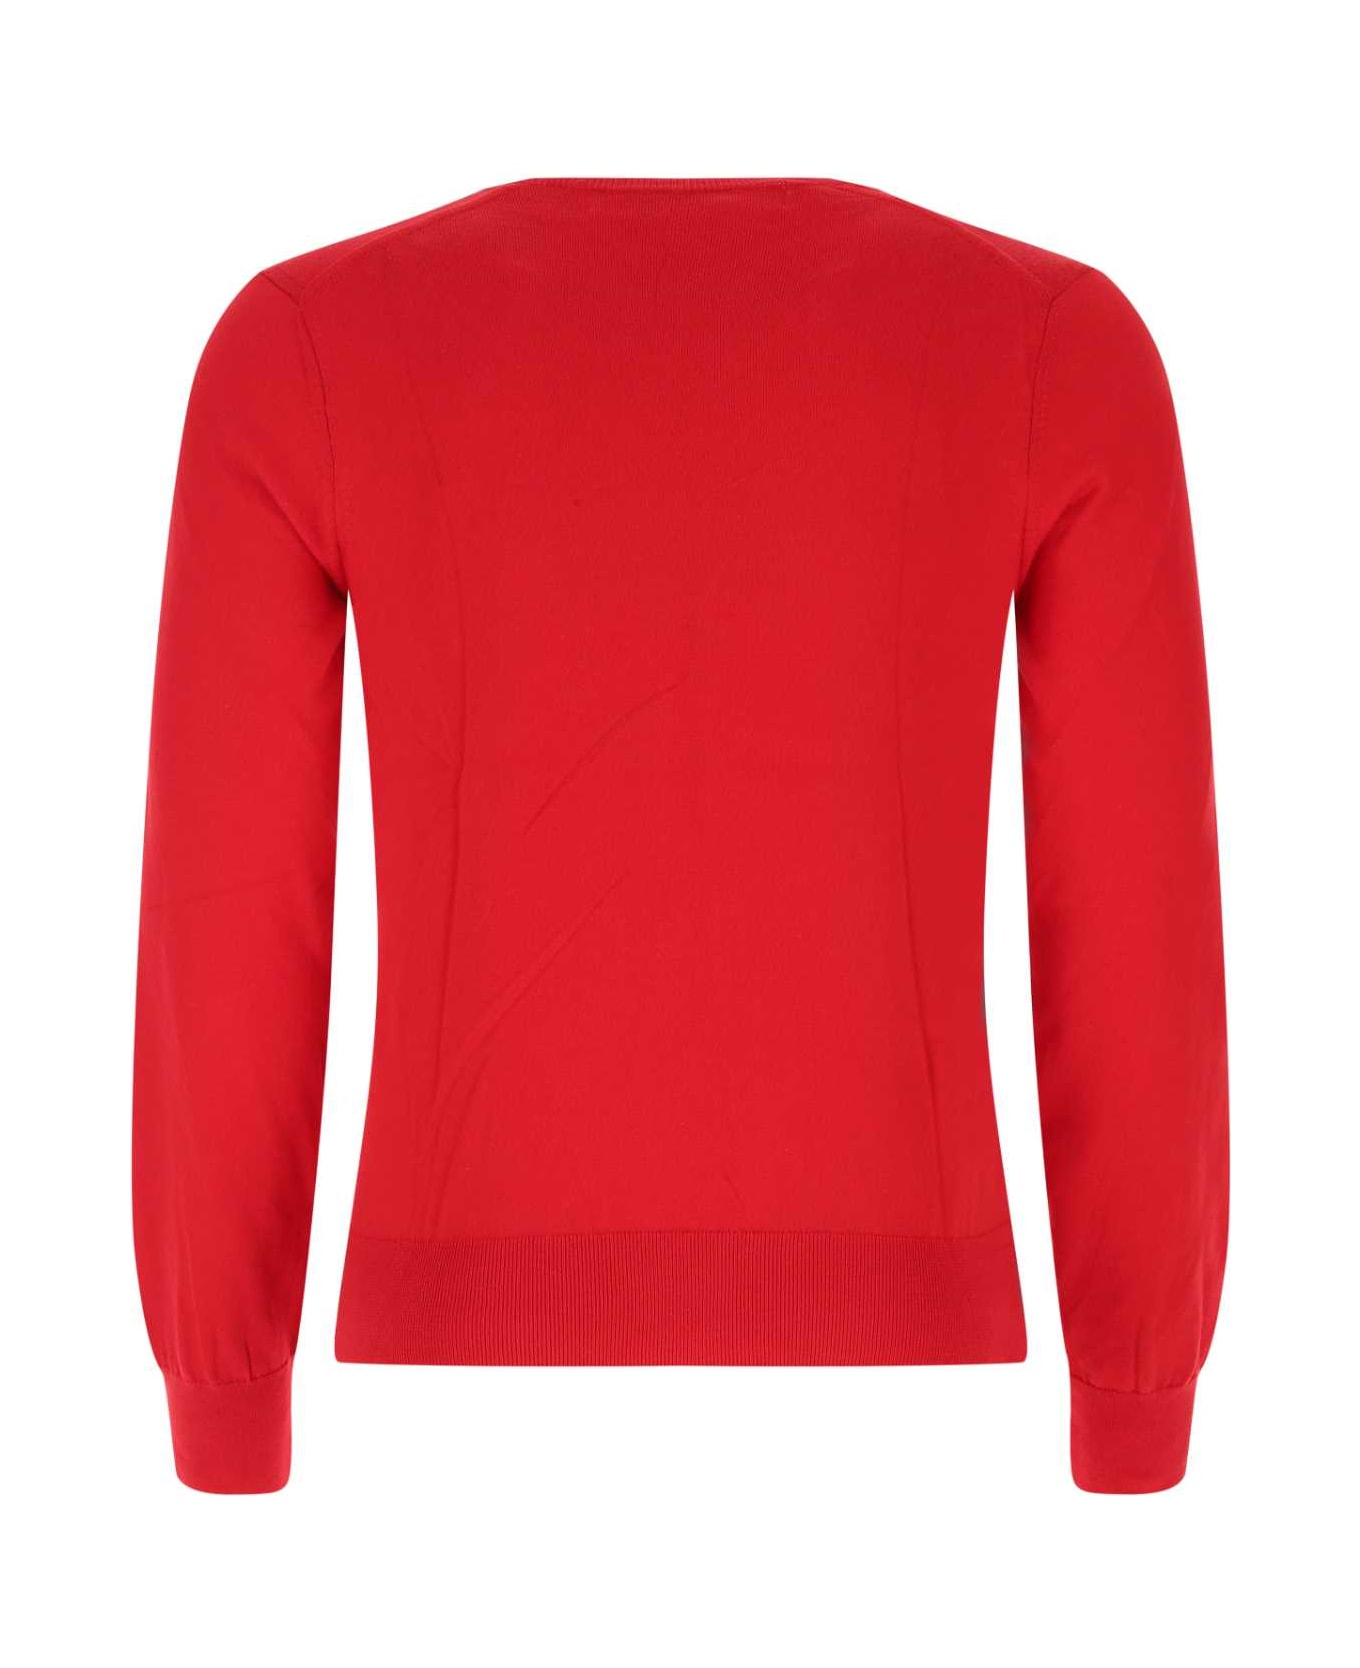 Comme des Garçons Play Red Cotton Sweater - RED ニットウェア